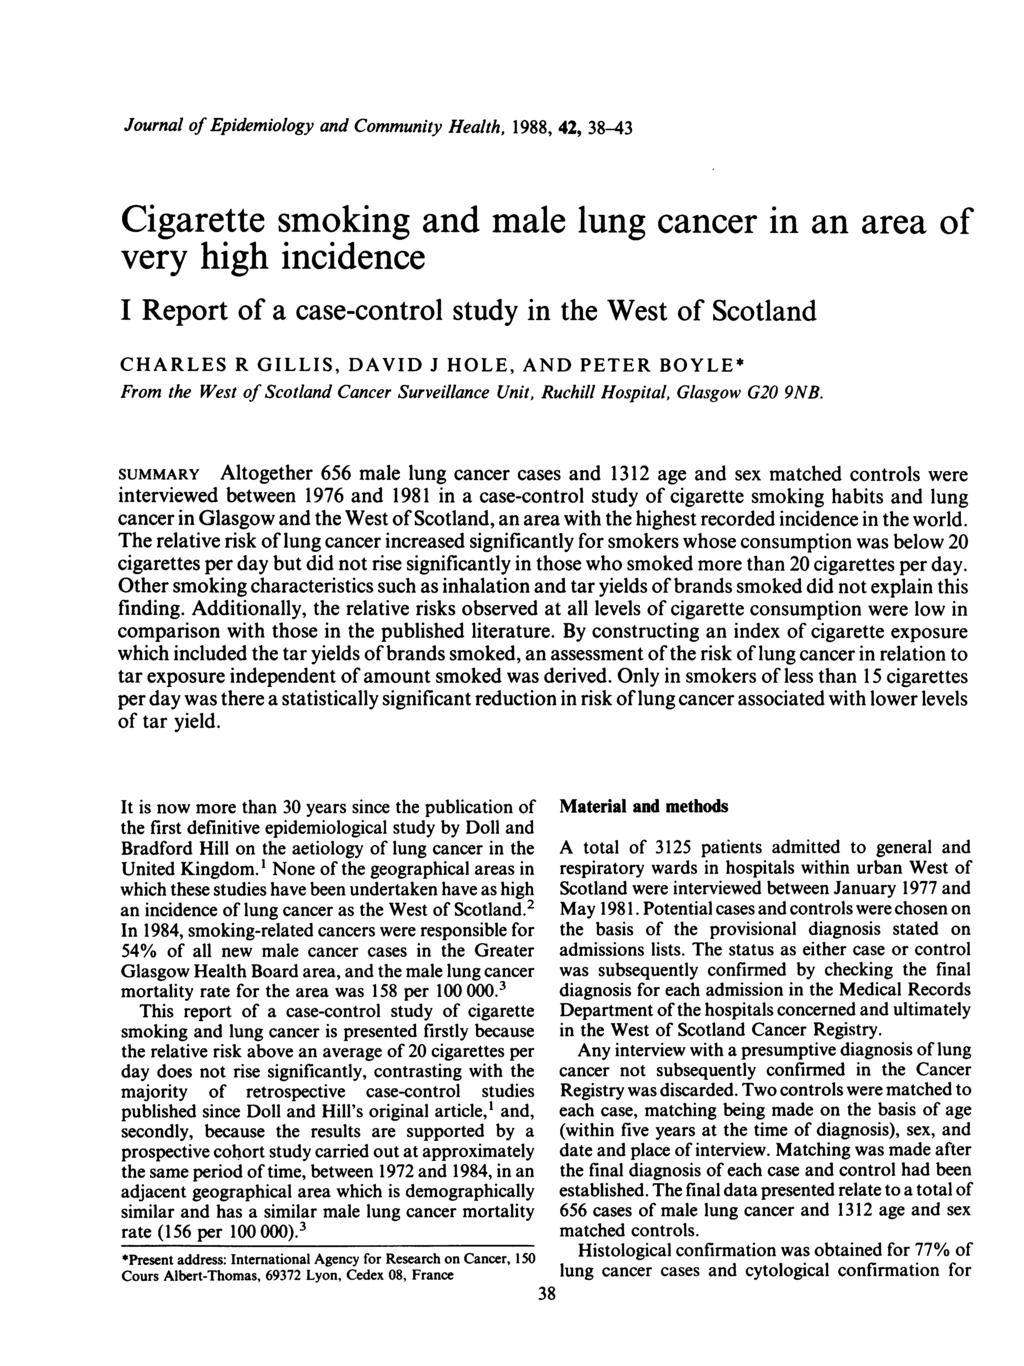 Journal of Epidemiology and Community Health, 1988, 42, 38-43 Cigarette smoking and male lung cancer in an area of very high incidence I Report of a case-control study in the West of Scotland CHARLES